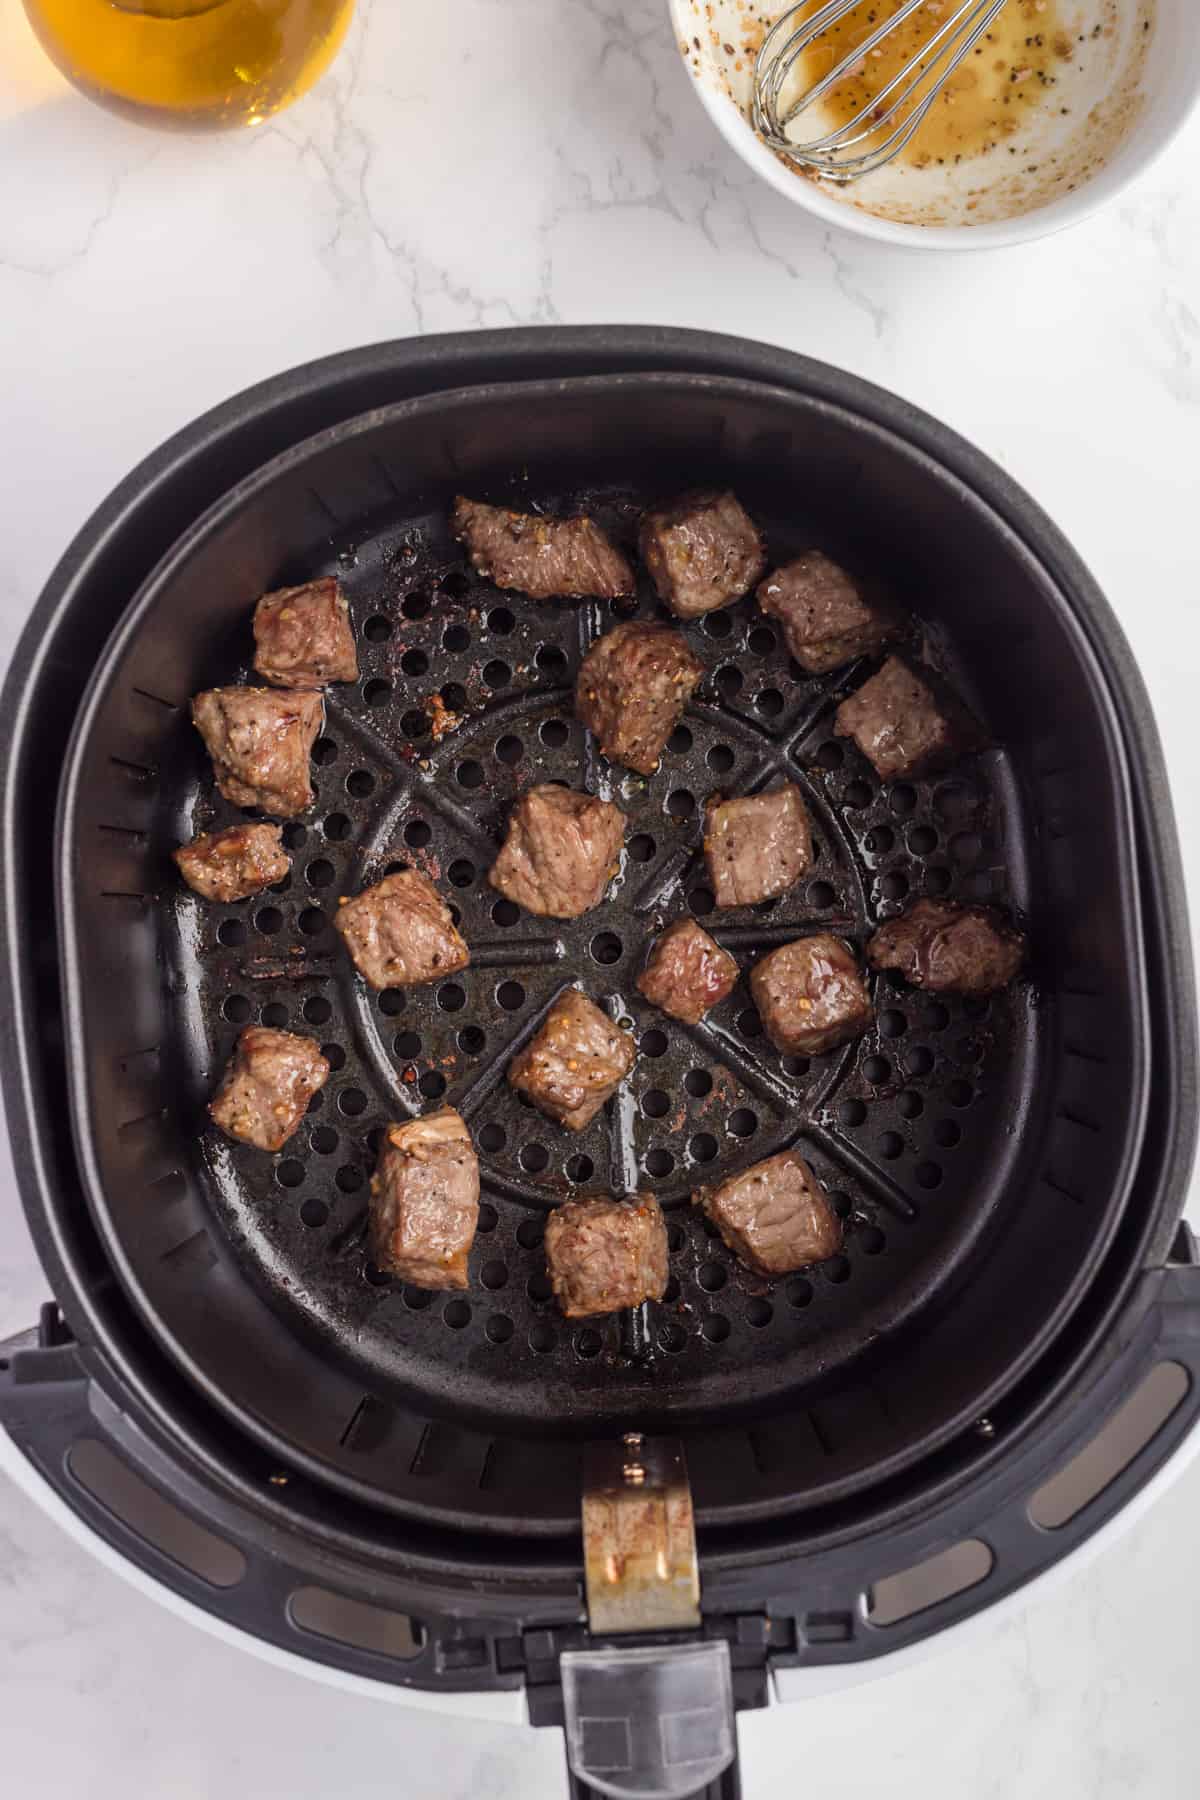 Steak in cubes cooked in the air fryer basket.